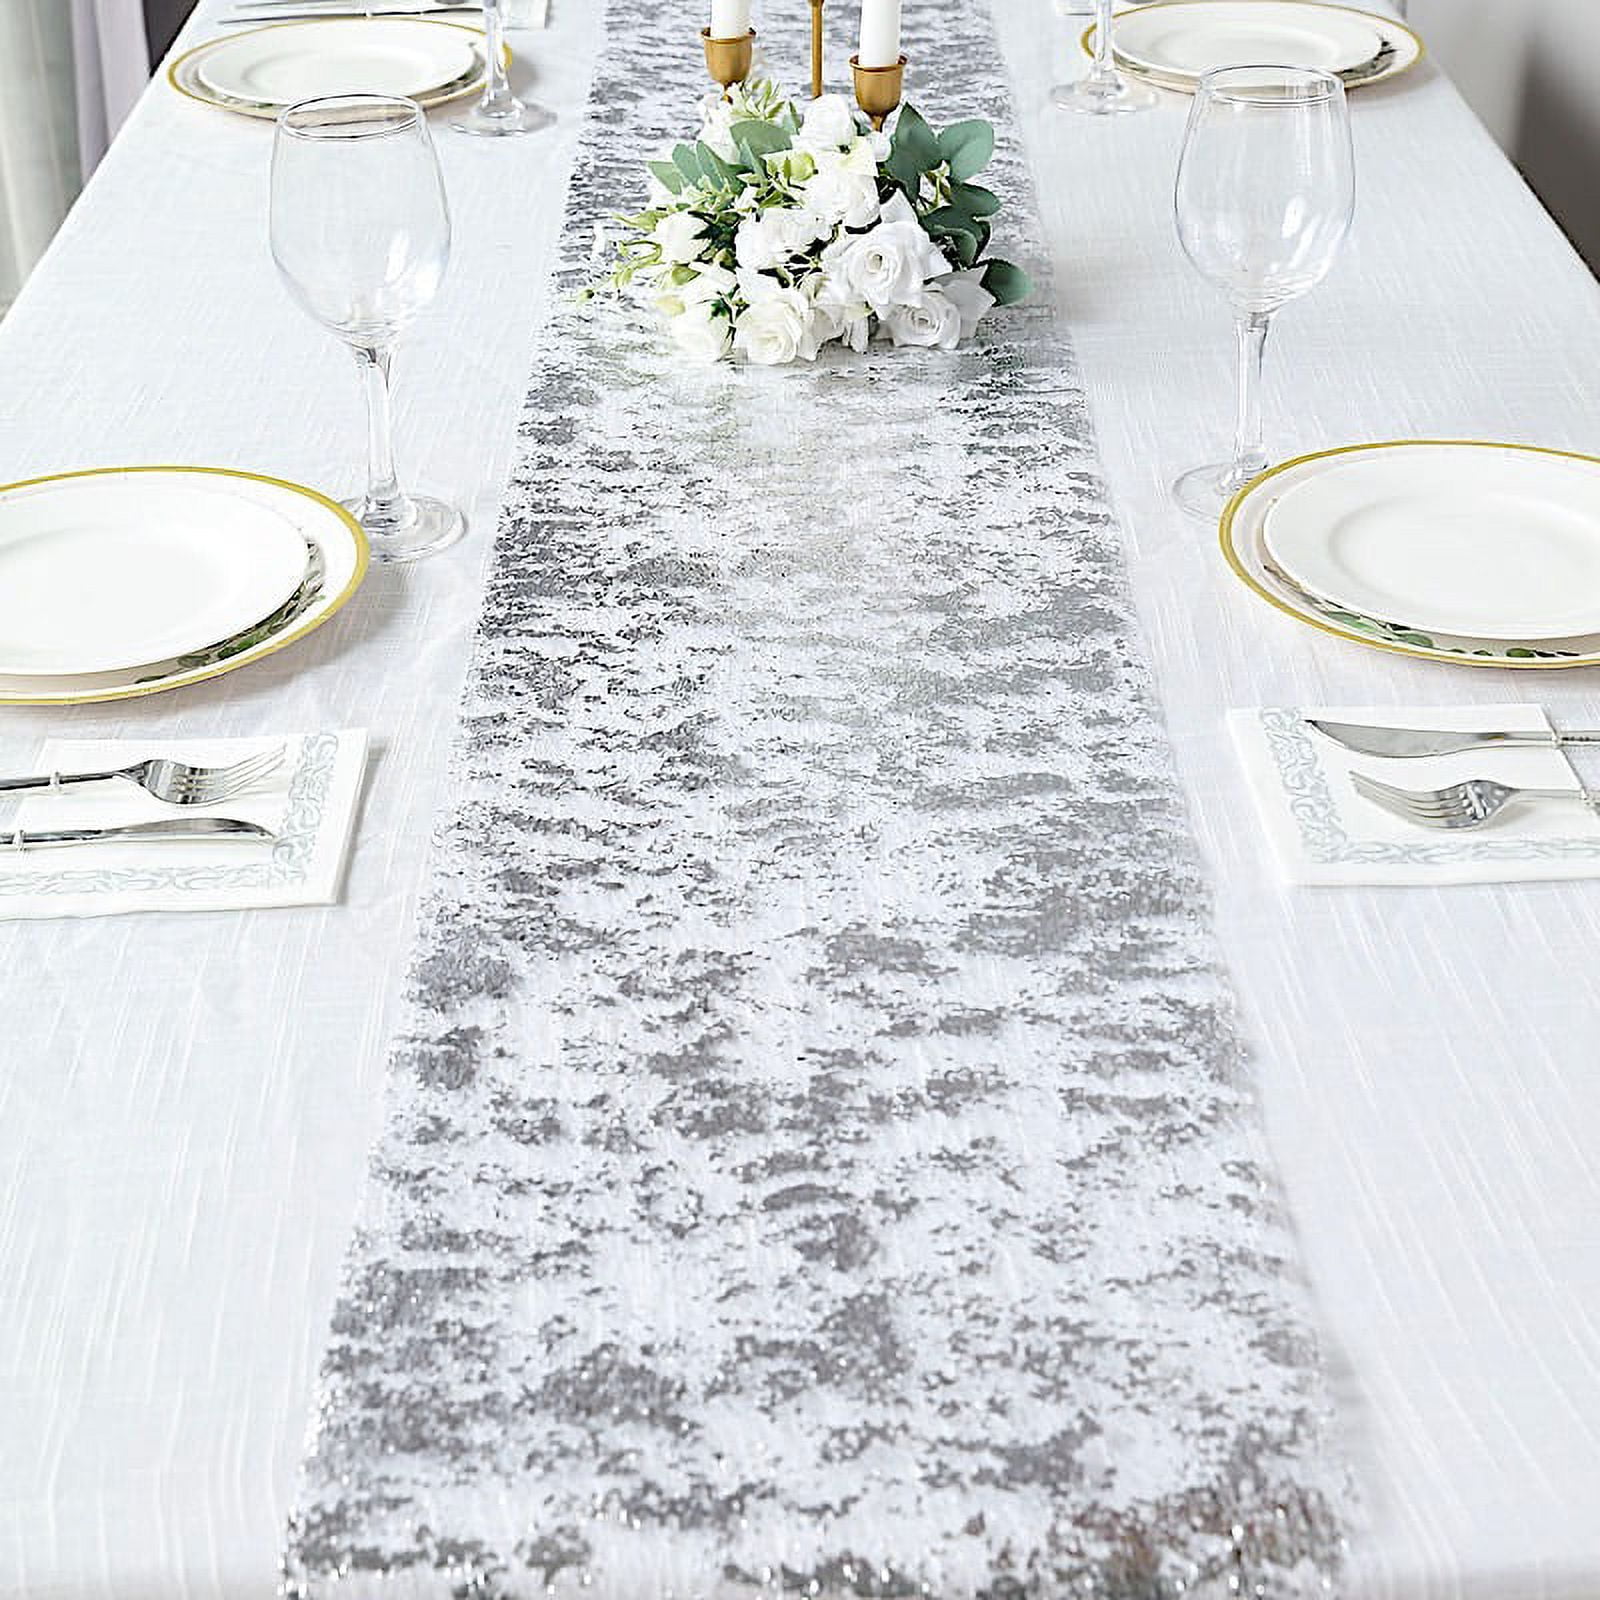 How to Clean Sterling Silver, China, and Table Linens - A Guide for Tabletop  Accessories